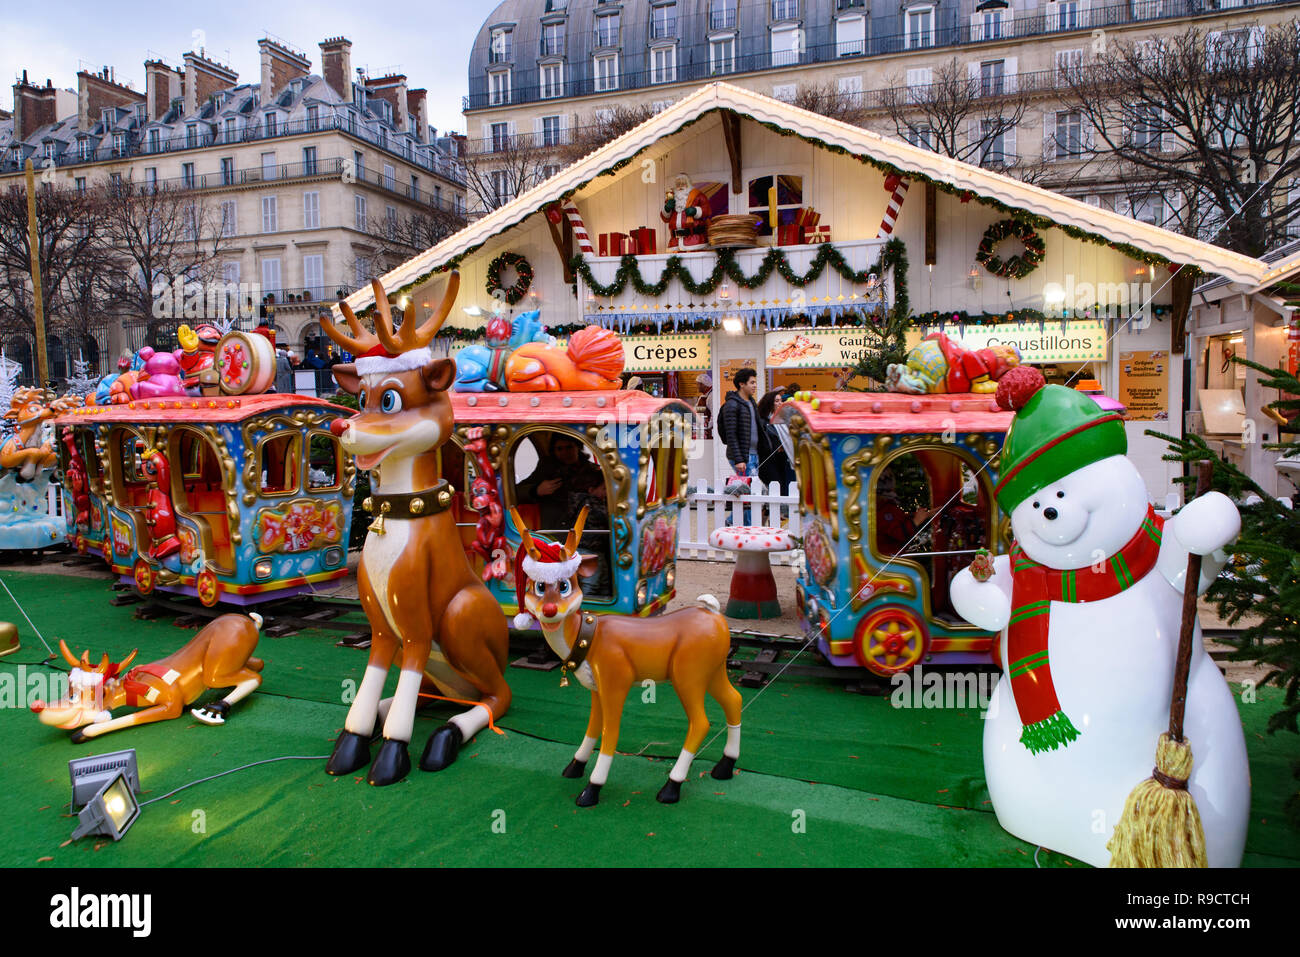 Entertainment ride in Christmas market in Tuileries Gardens, Paris, France Stock Photo